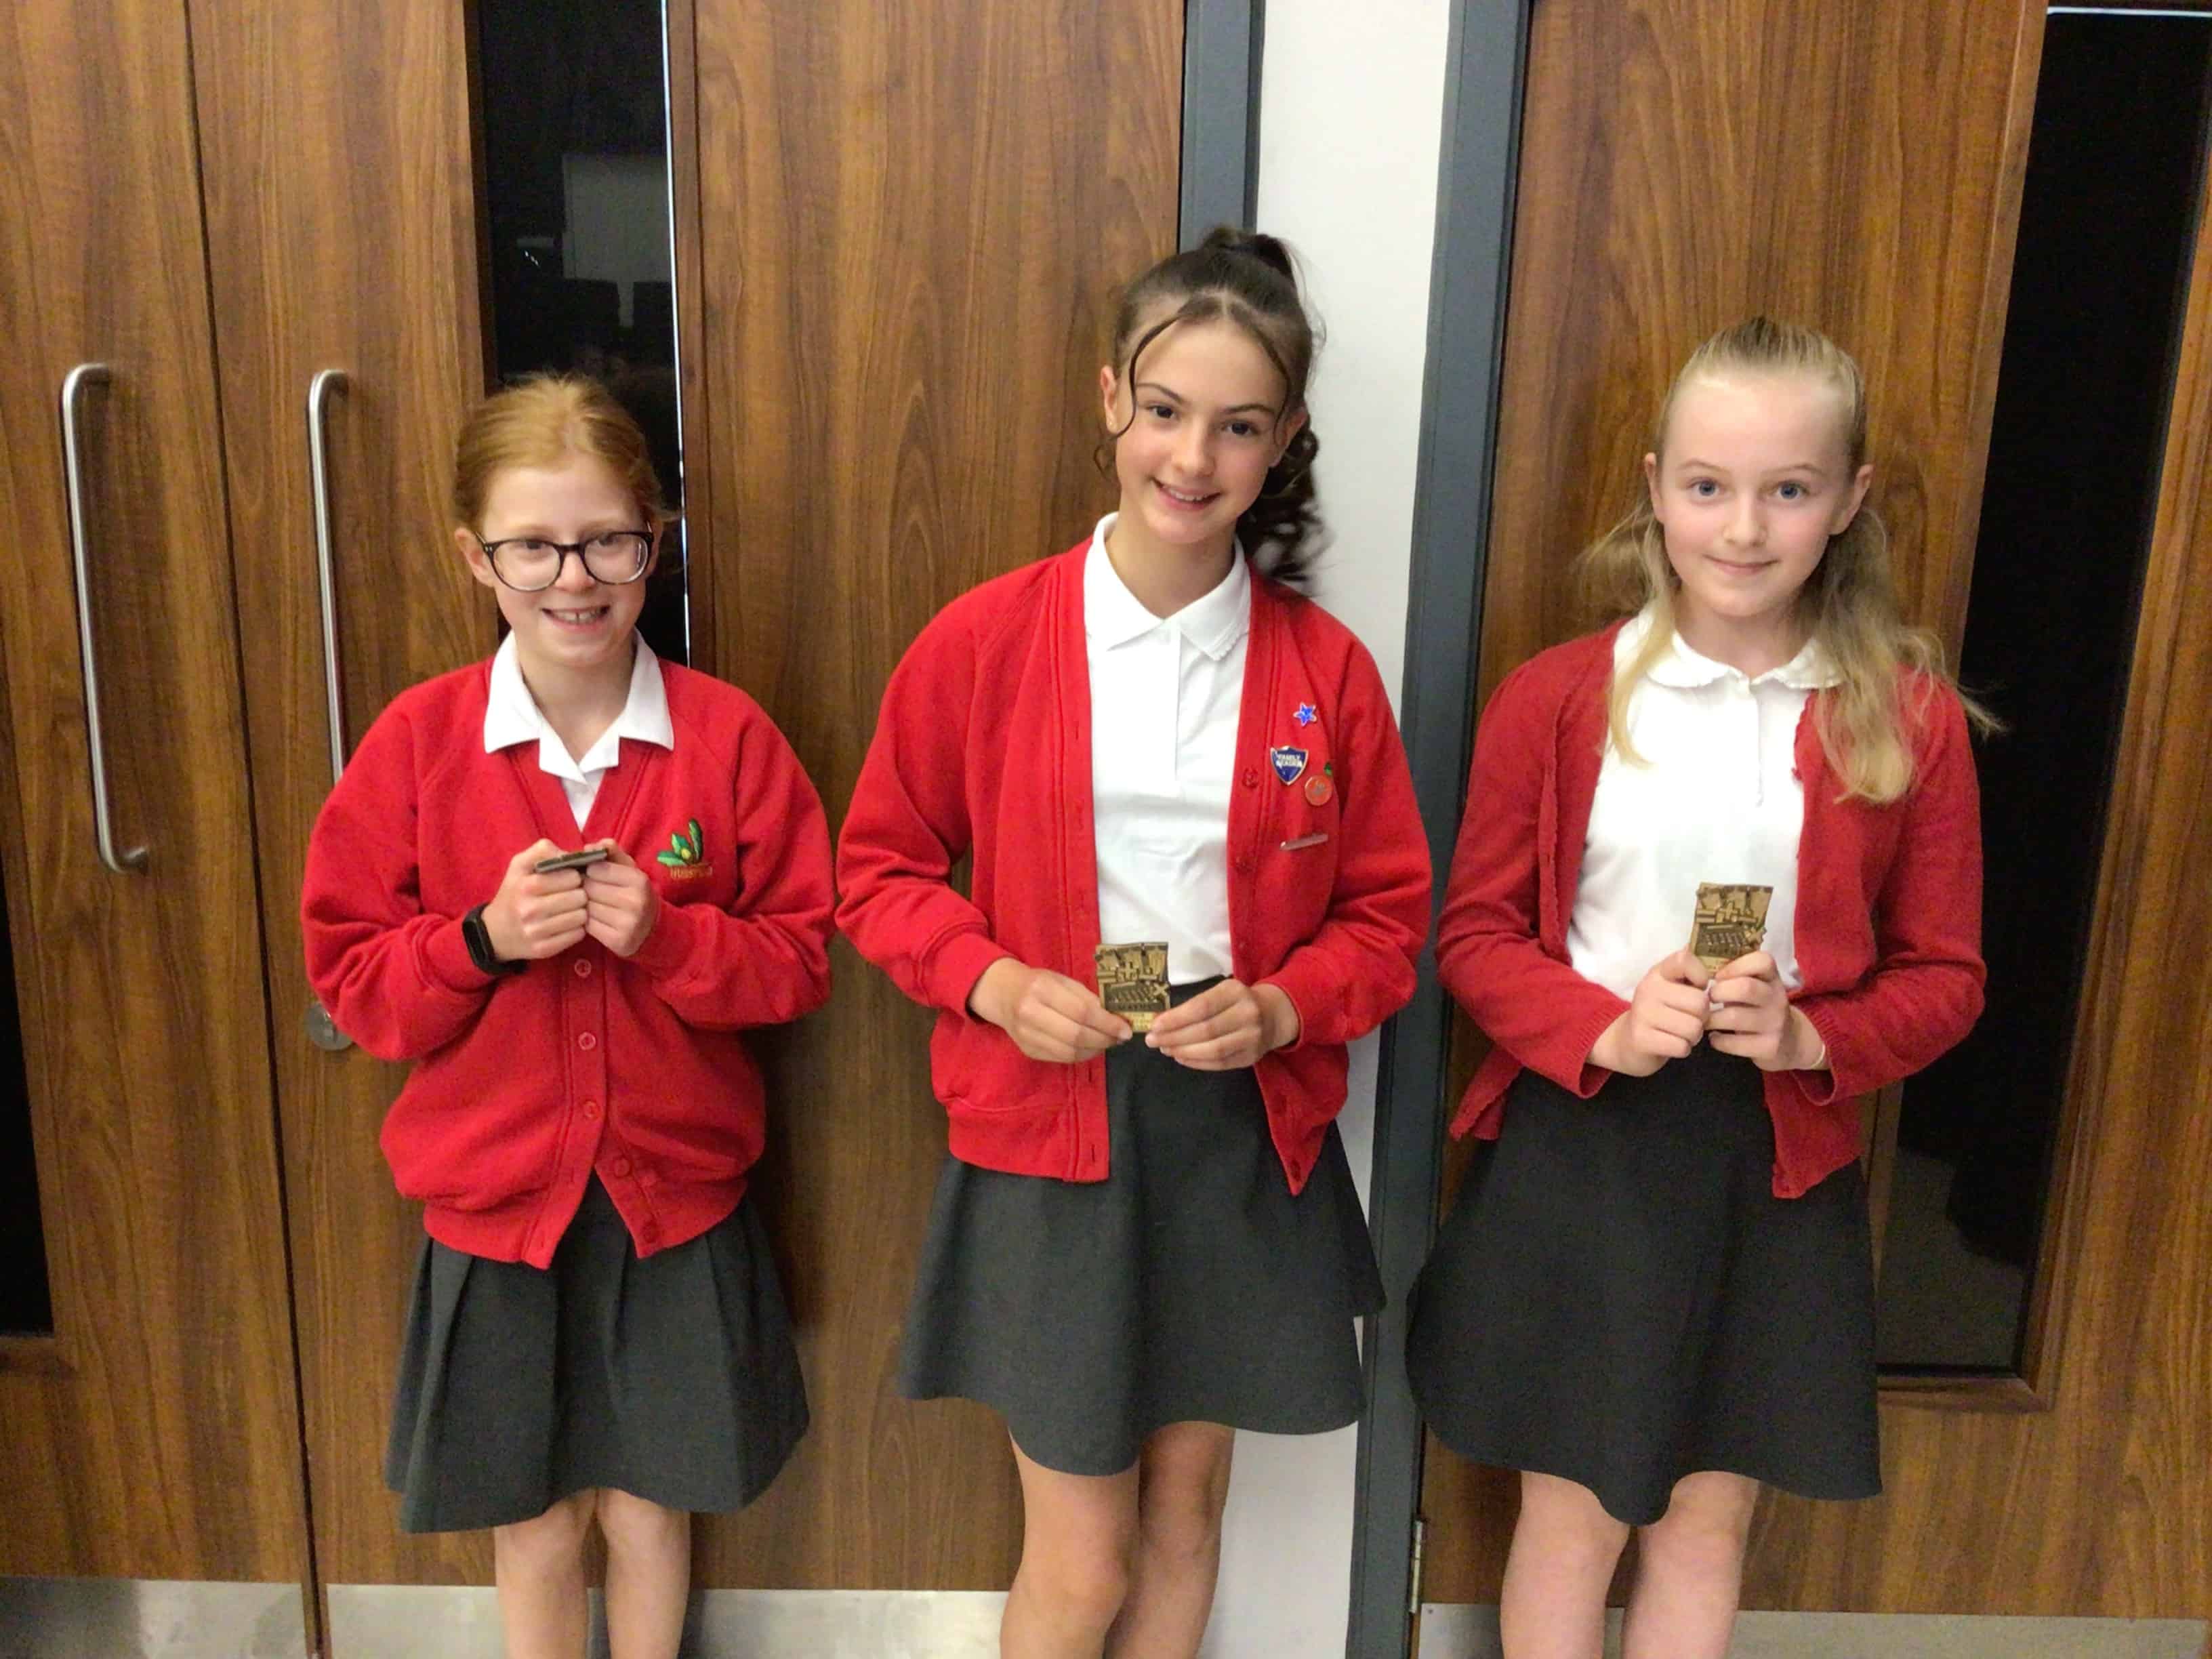 The winning pupils from Hursthead Primary smile with their CHHS Maths Award magnets that they earned at the Cheadle Hulme High School Maths Award Evening.